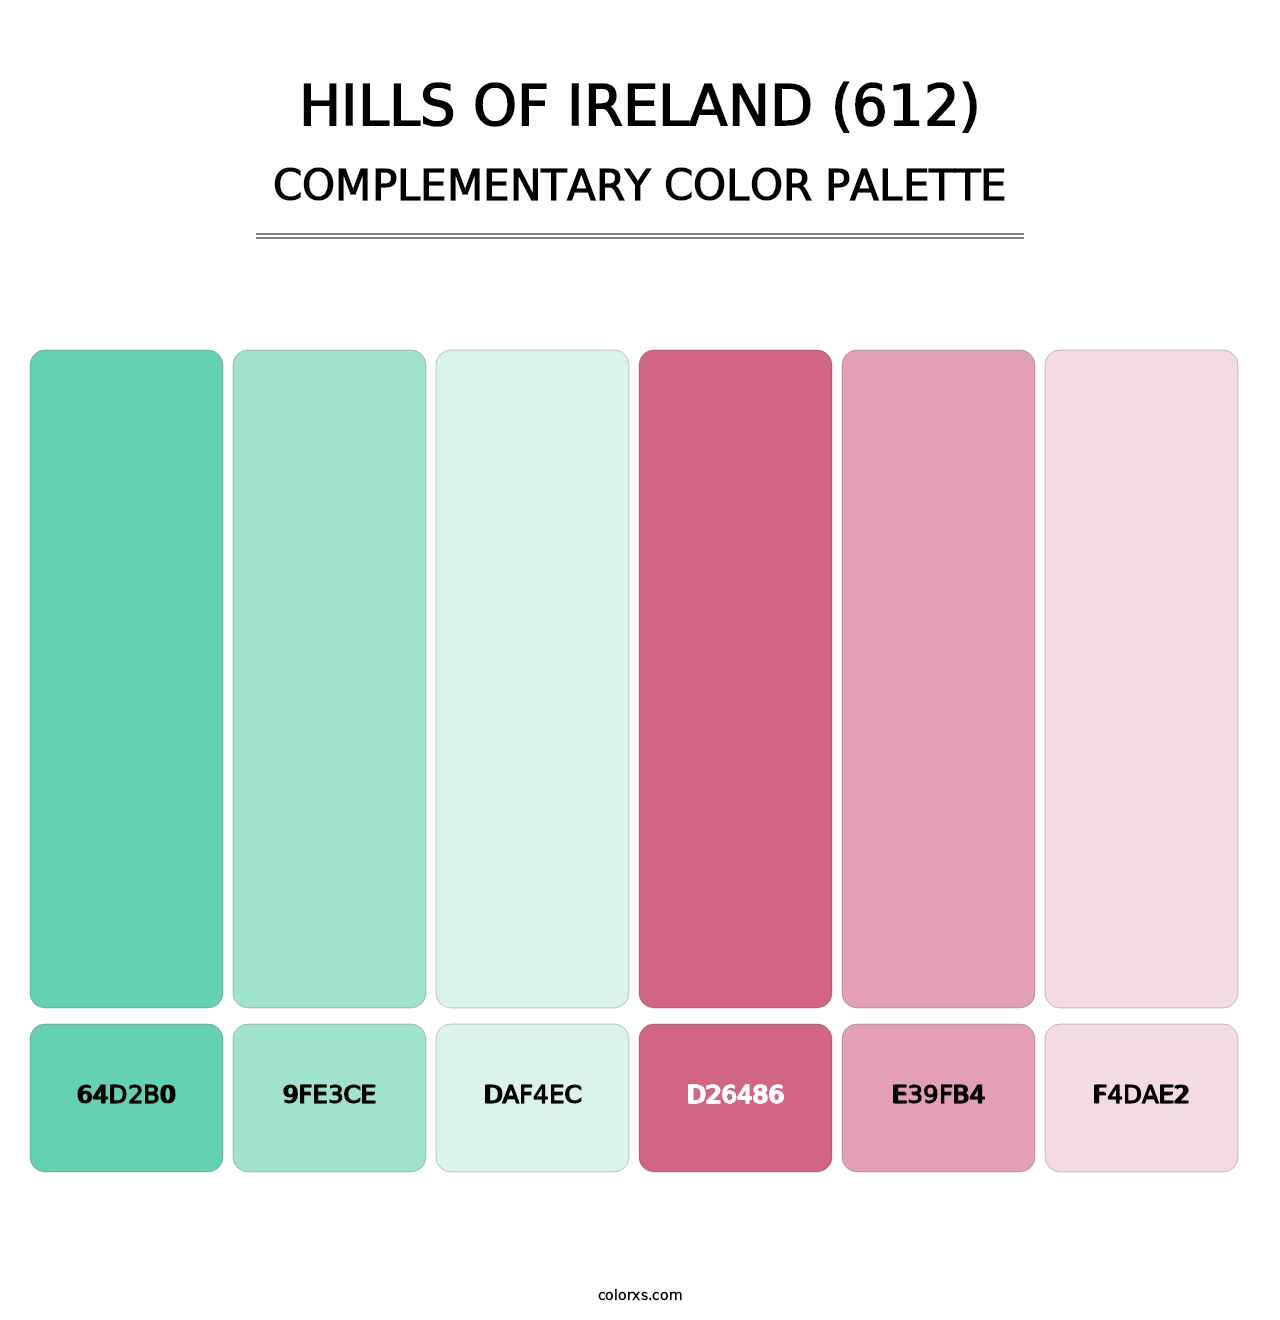 Hills of Ireland (612) - Complementary Color Palette